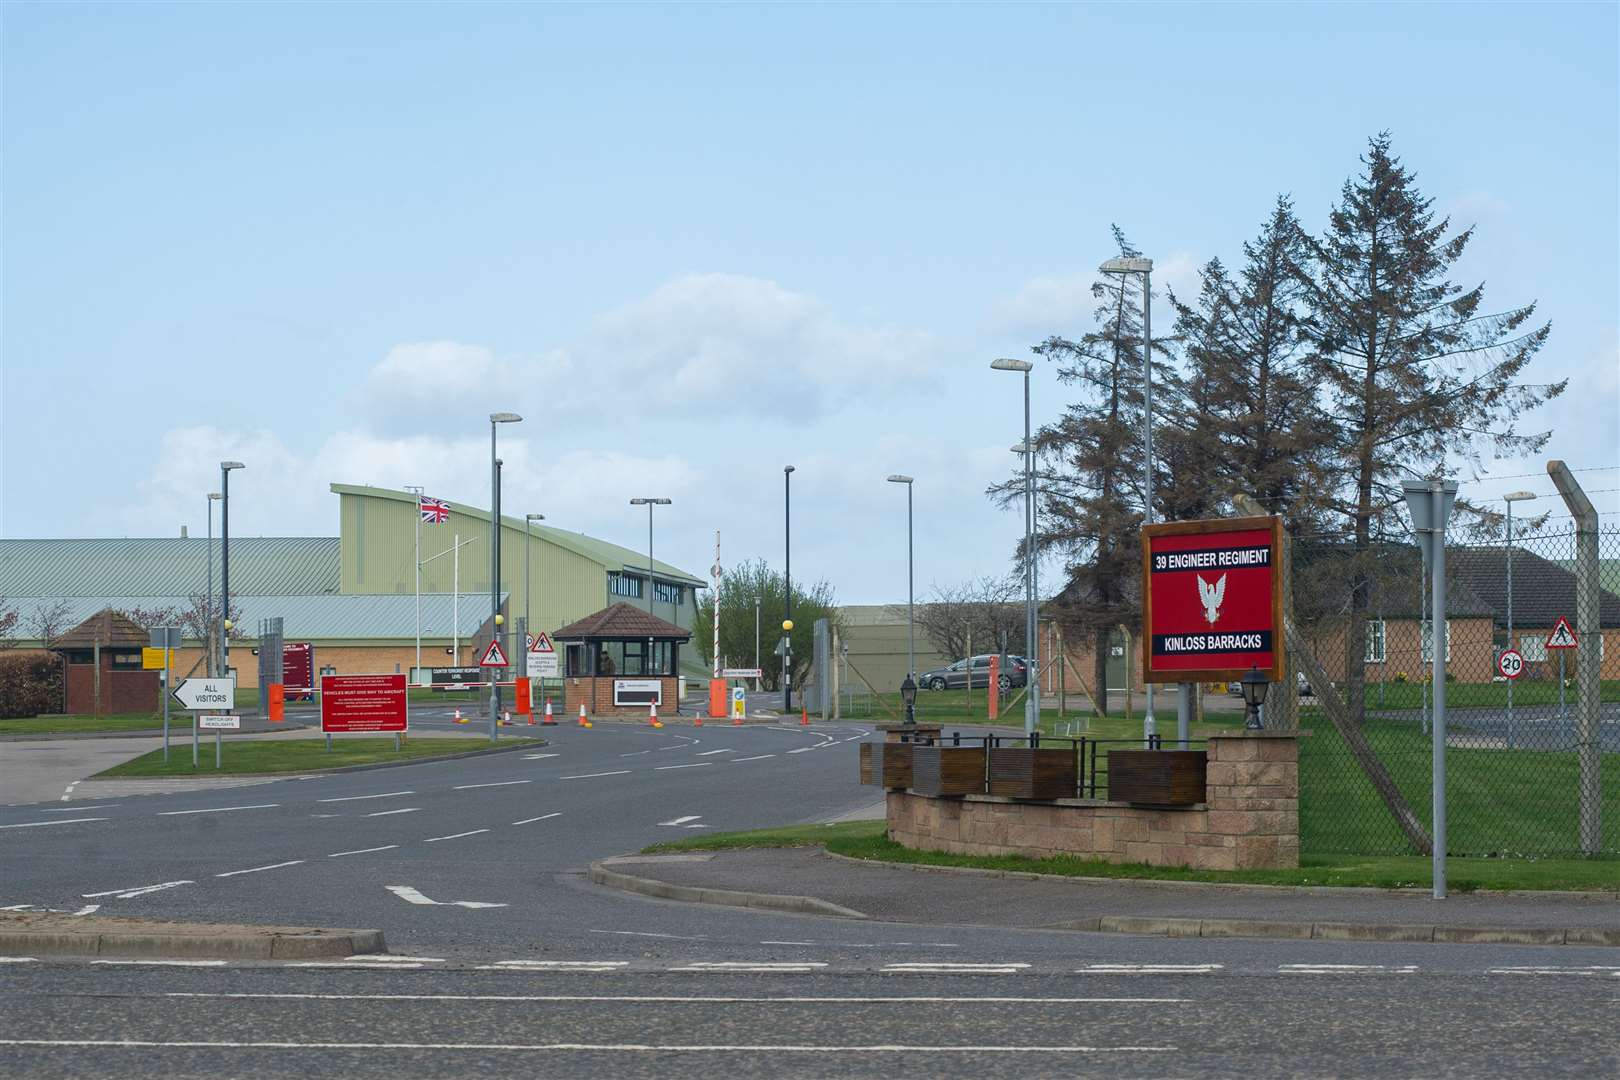 Kinloss Barracks is set to welcome more personnel.